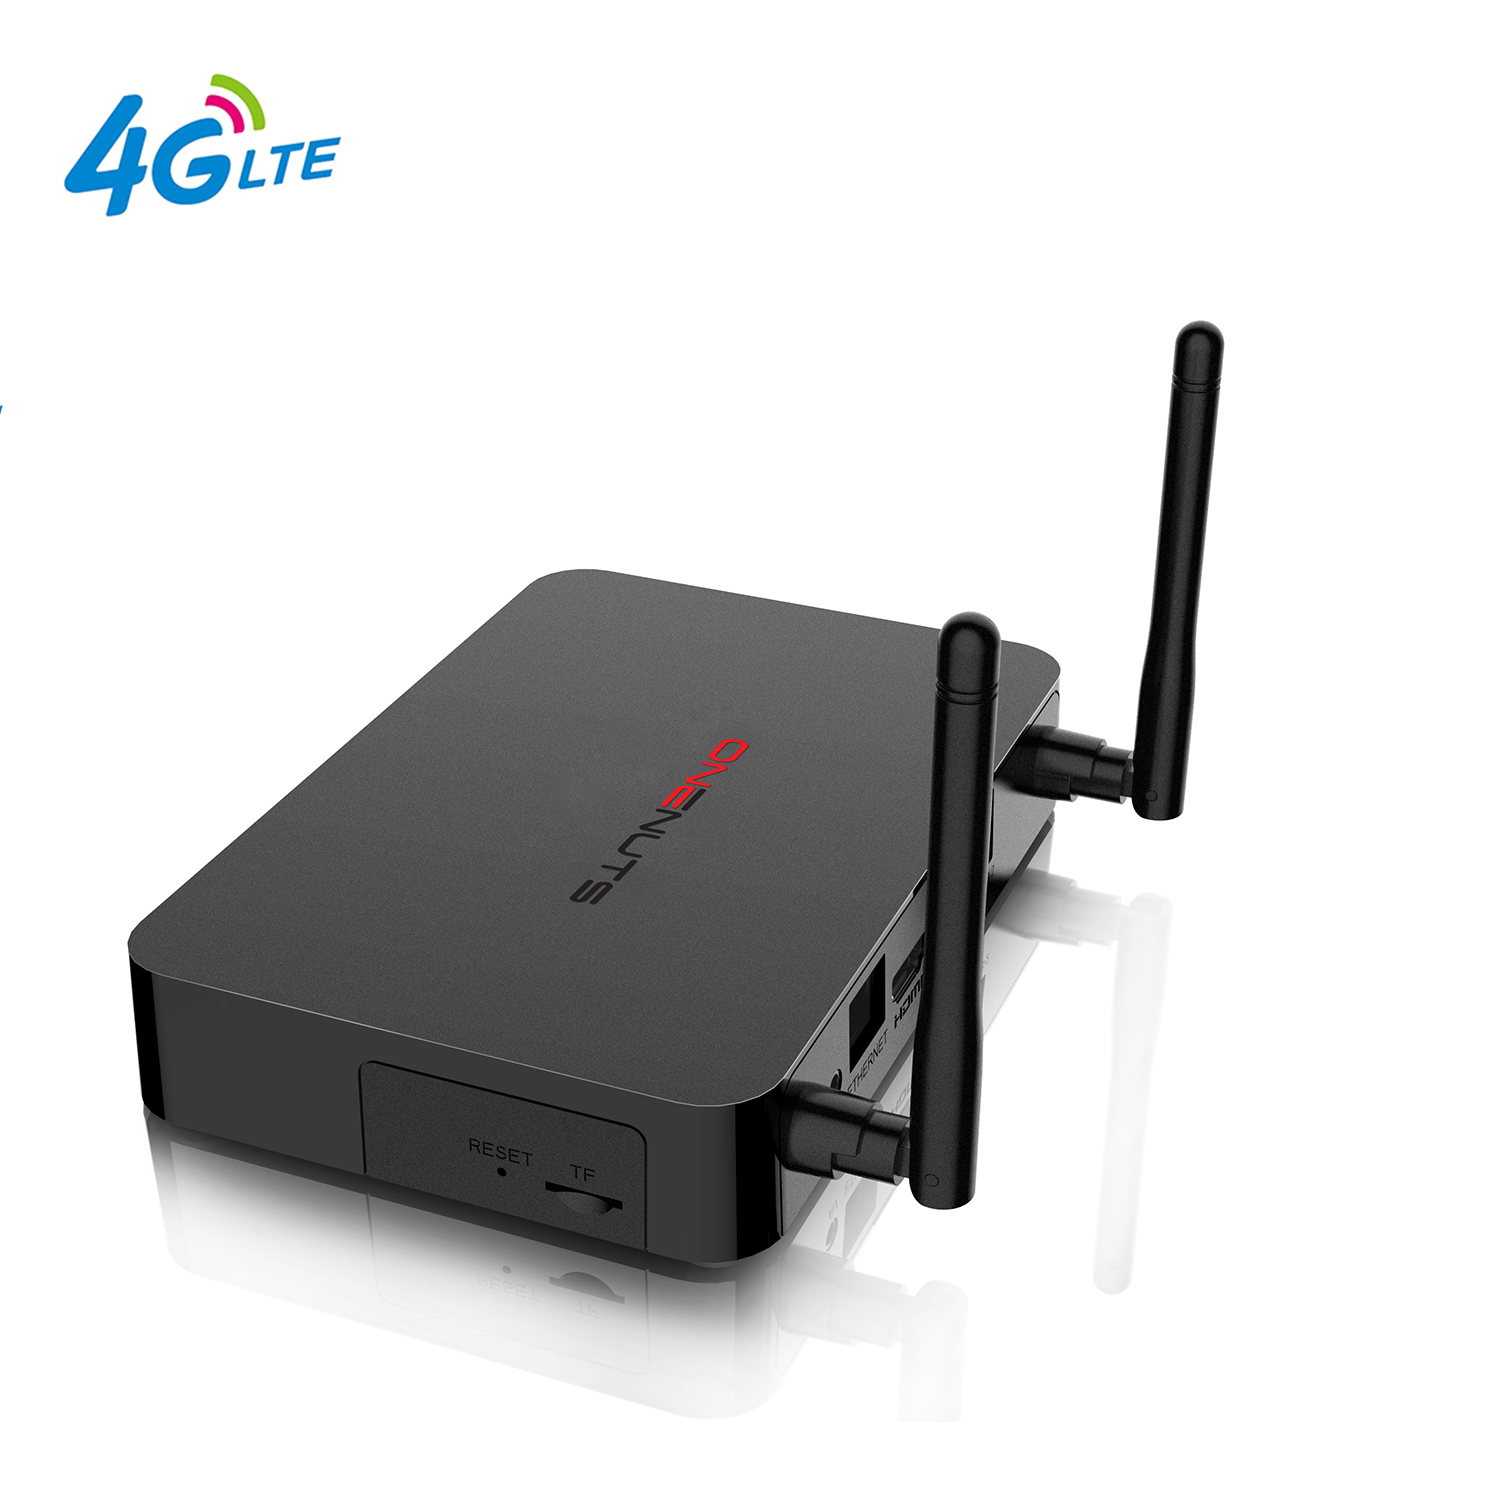 Modem WCDMA Huawei Box Android integrato, dongle WCDMA 4G/3G Android TV Box